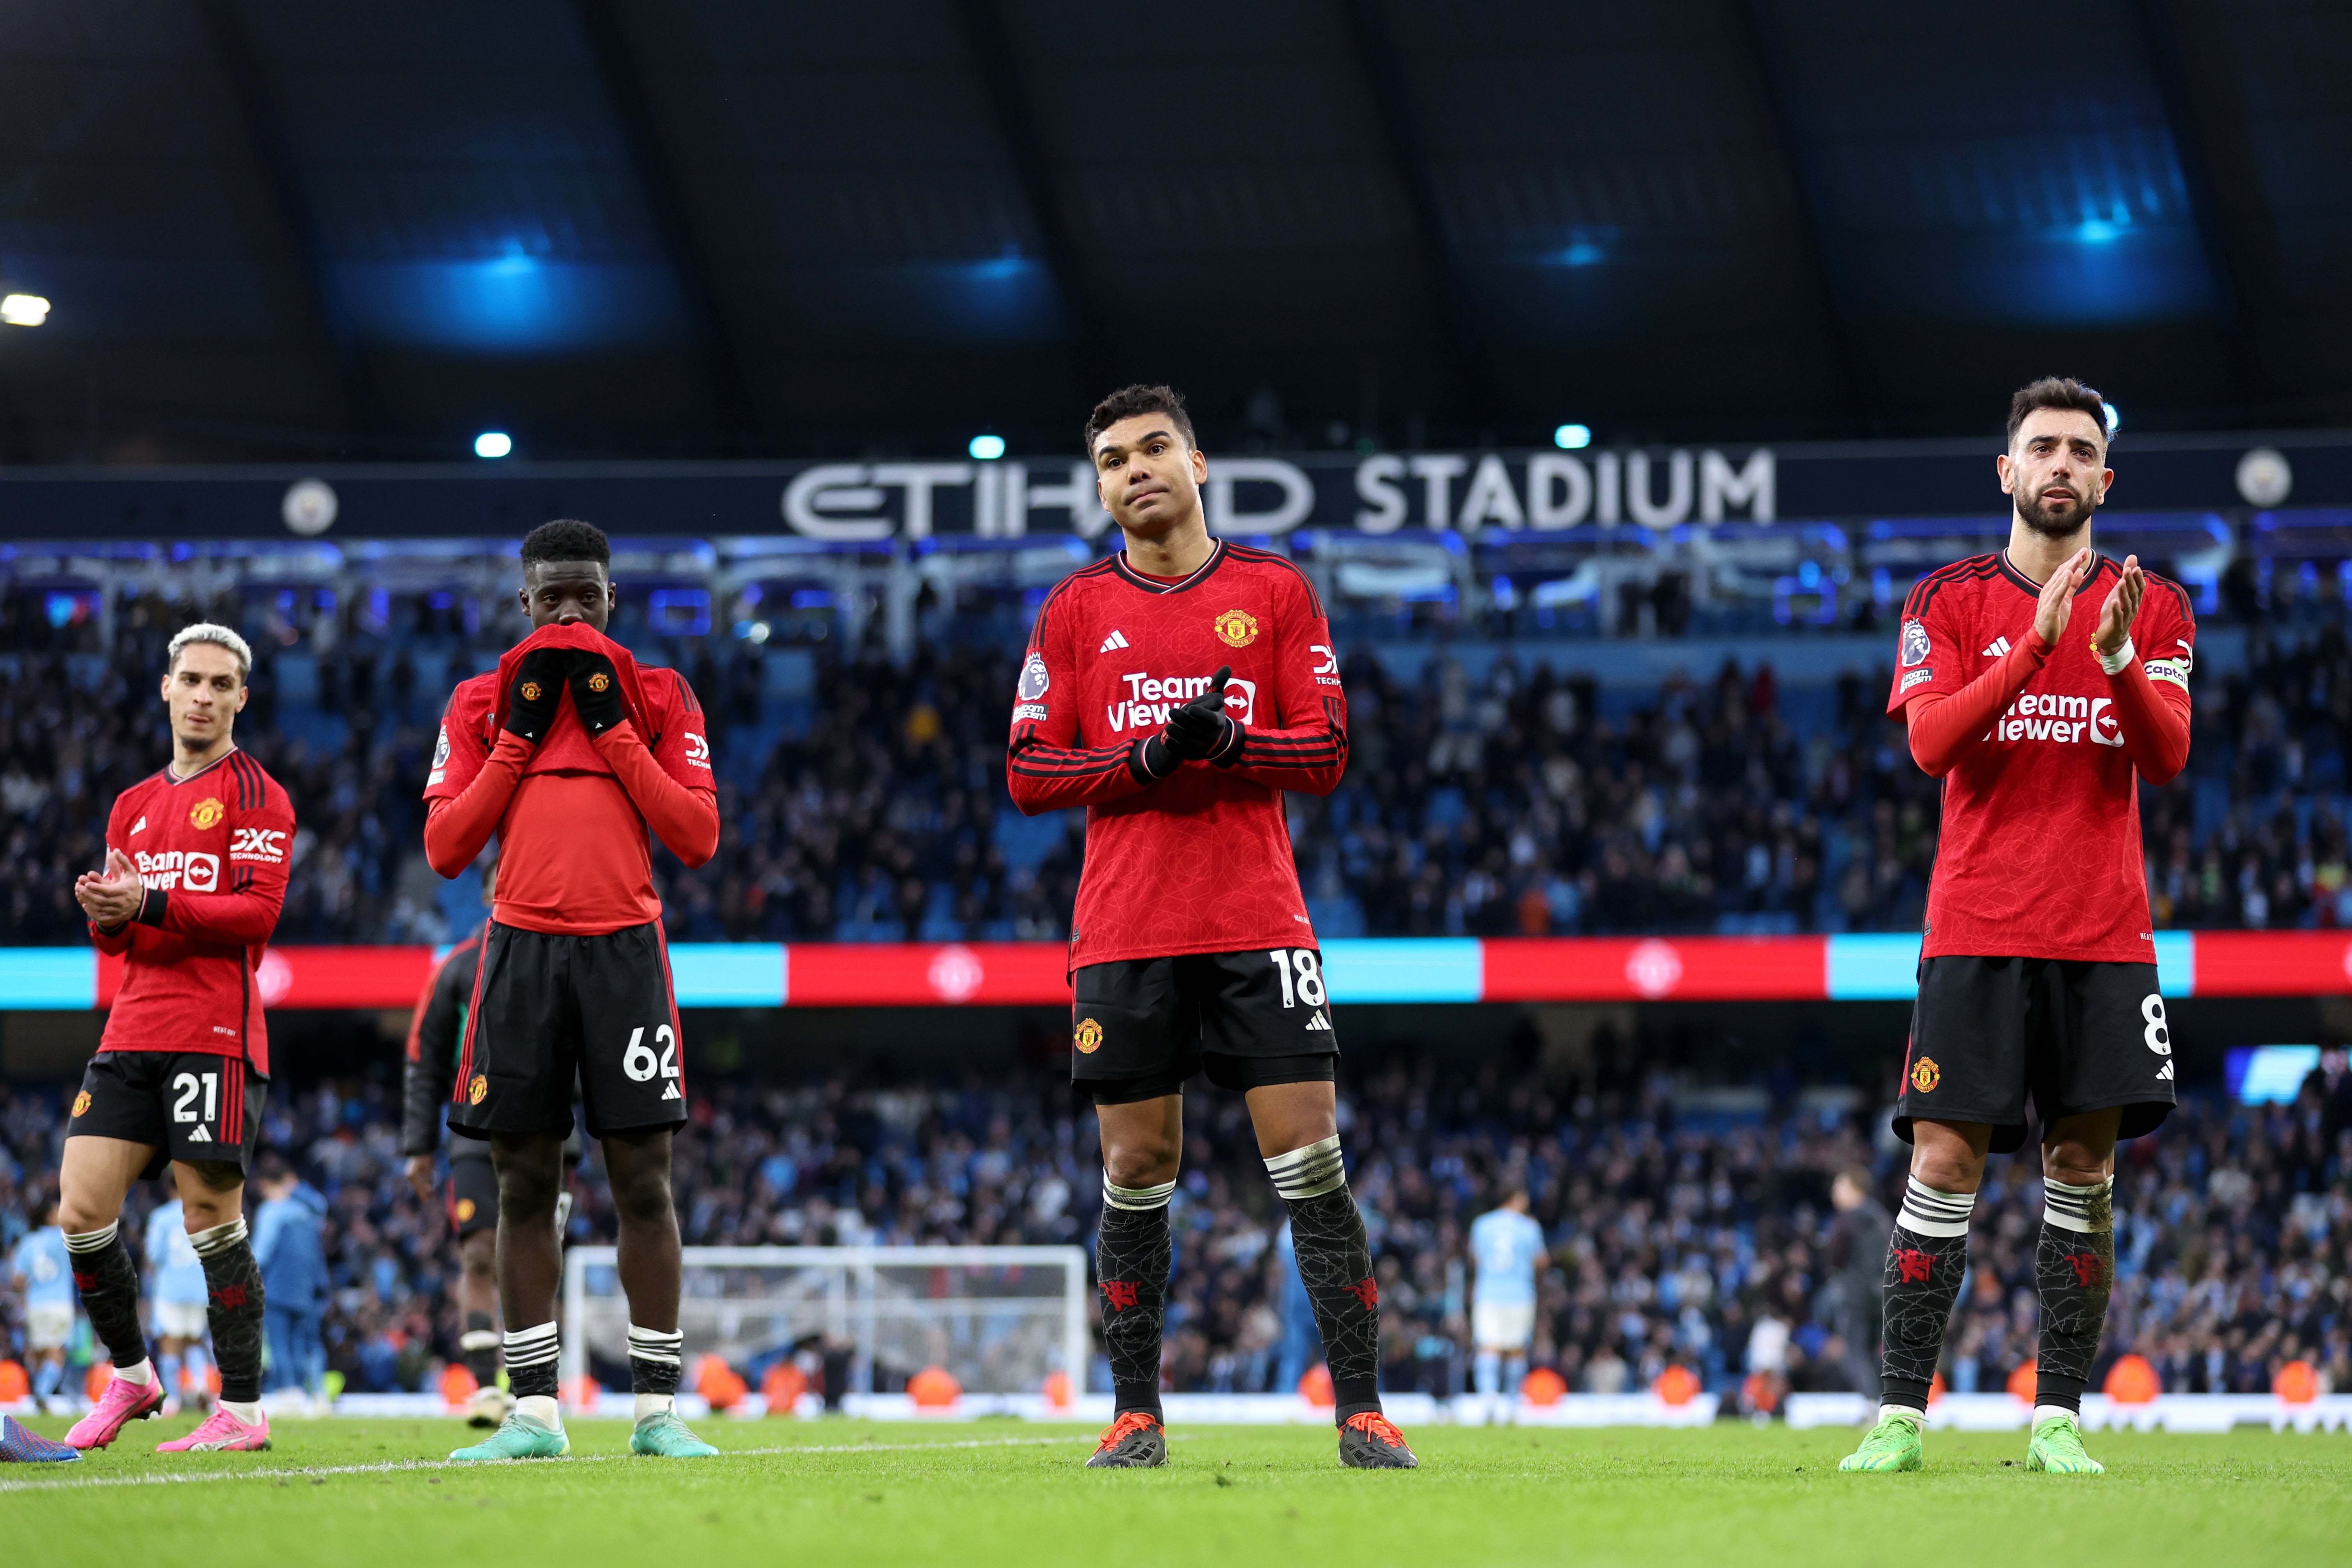 Manchester United were well beaten by Manchester City at the Etihad Stadium